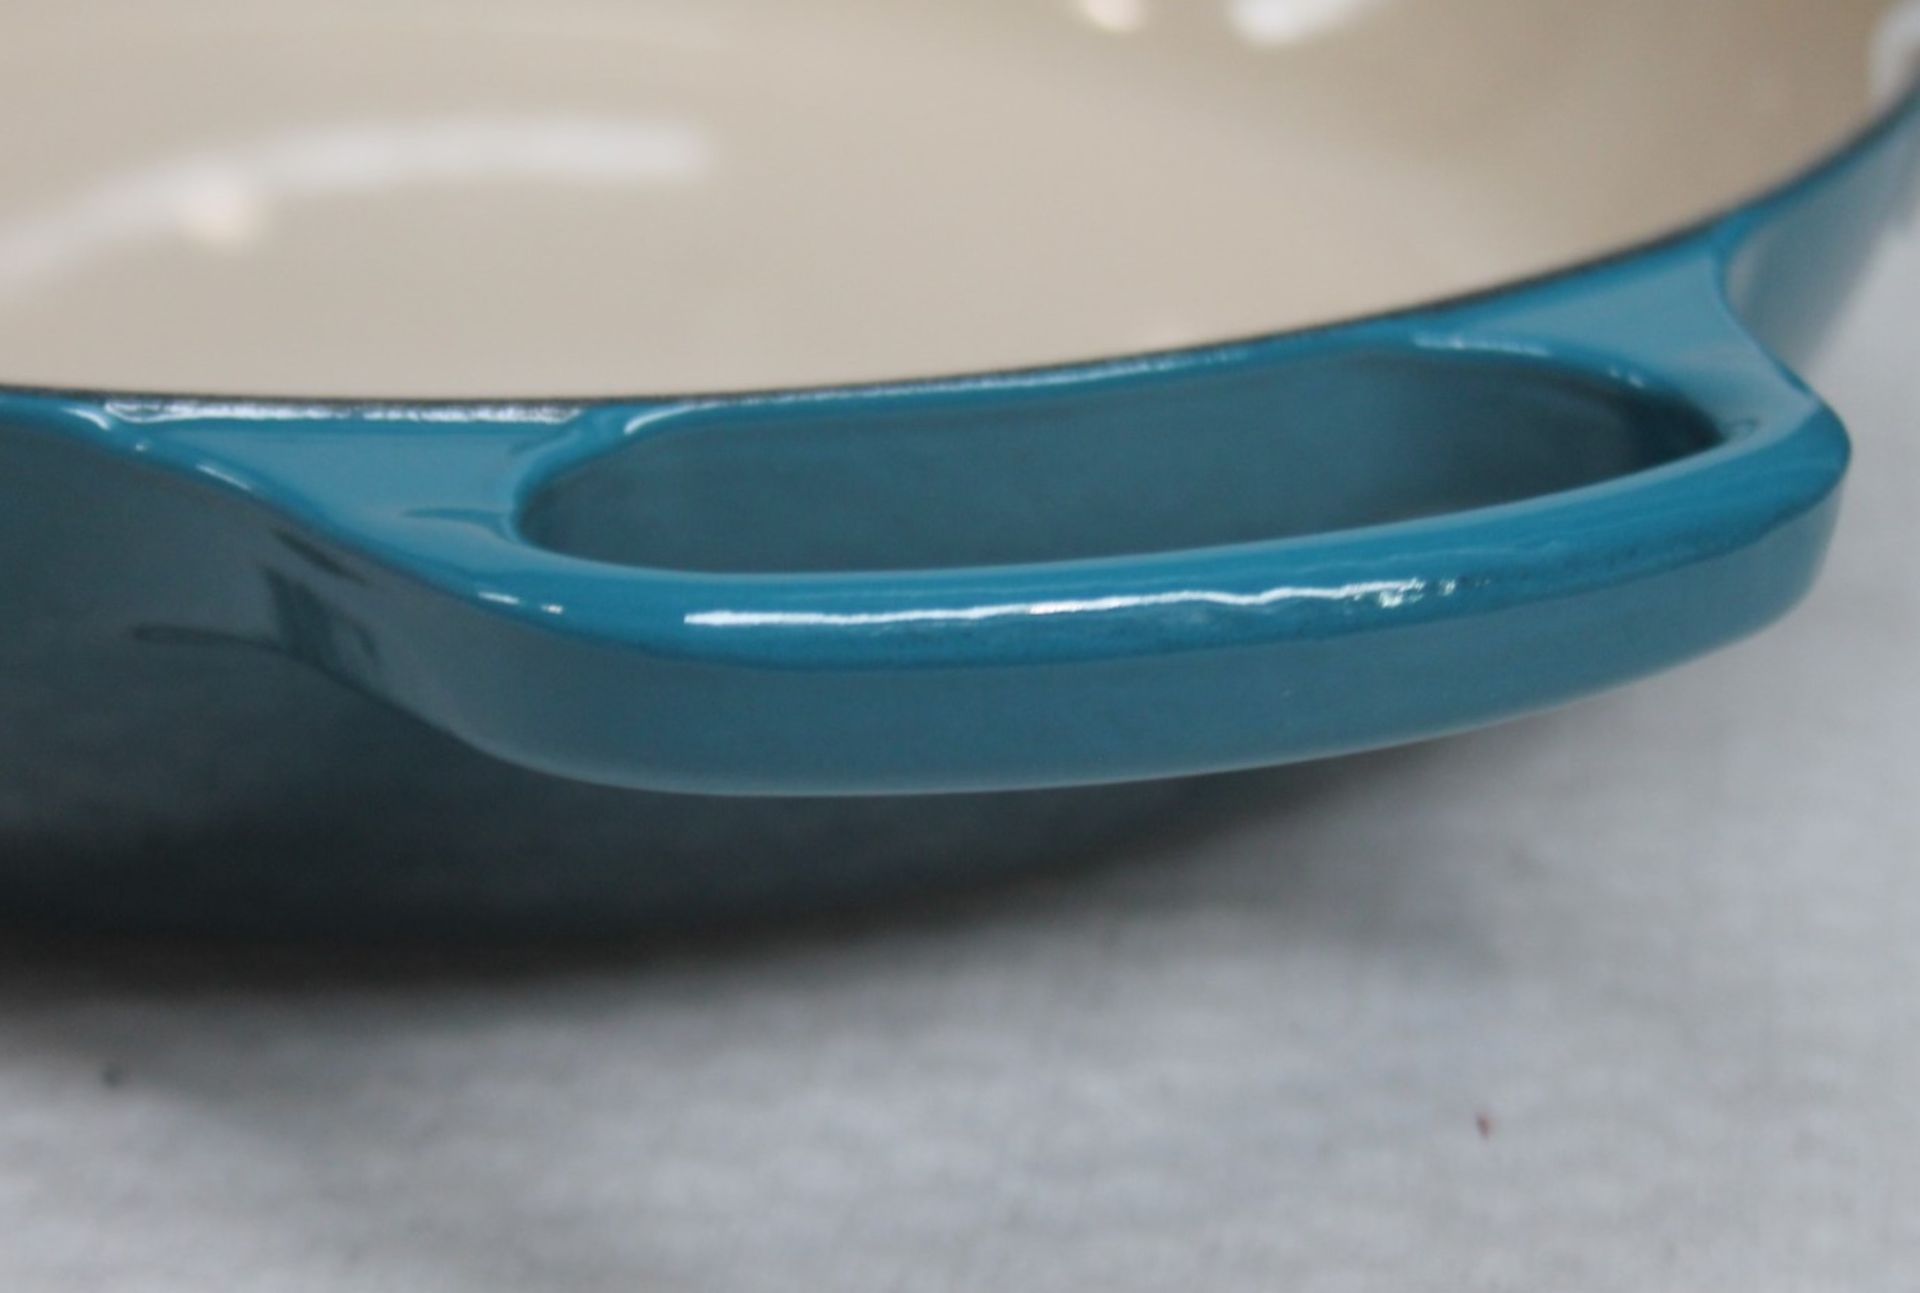 1 x LE CREUSET 'Signature' Enamelled Cast Iron Shallow Casserole Dish In Teal - RRP £270.00 - Image 10 of 13